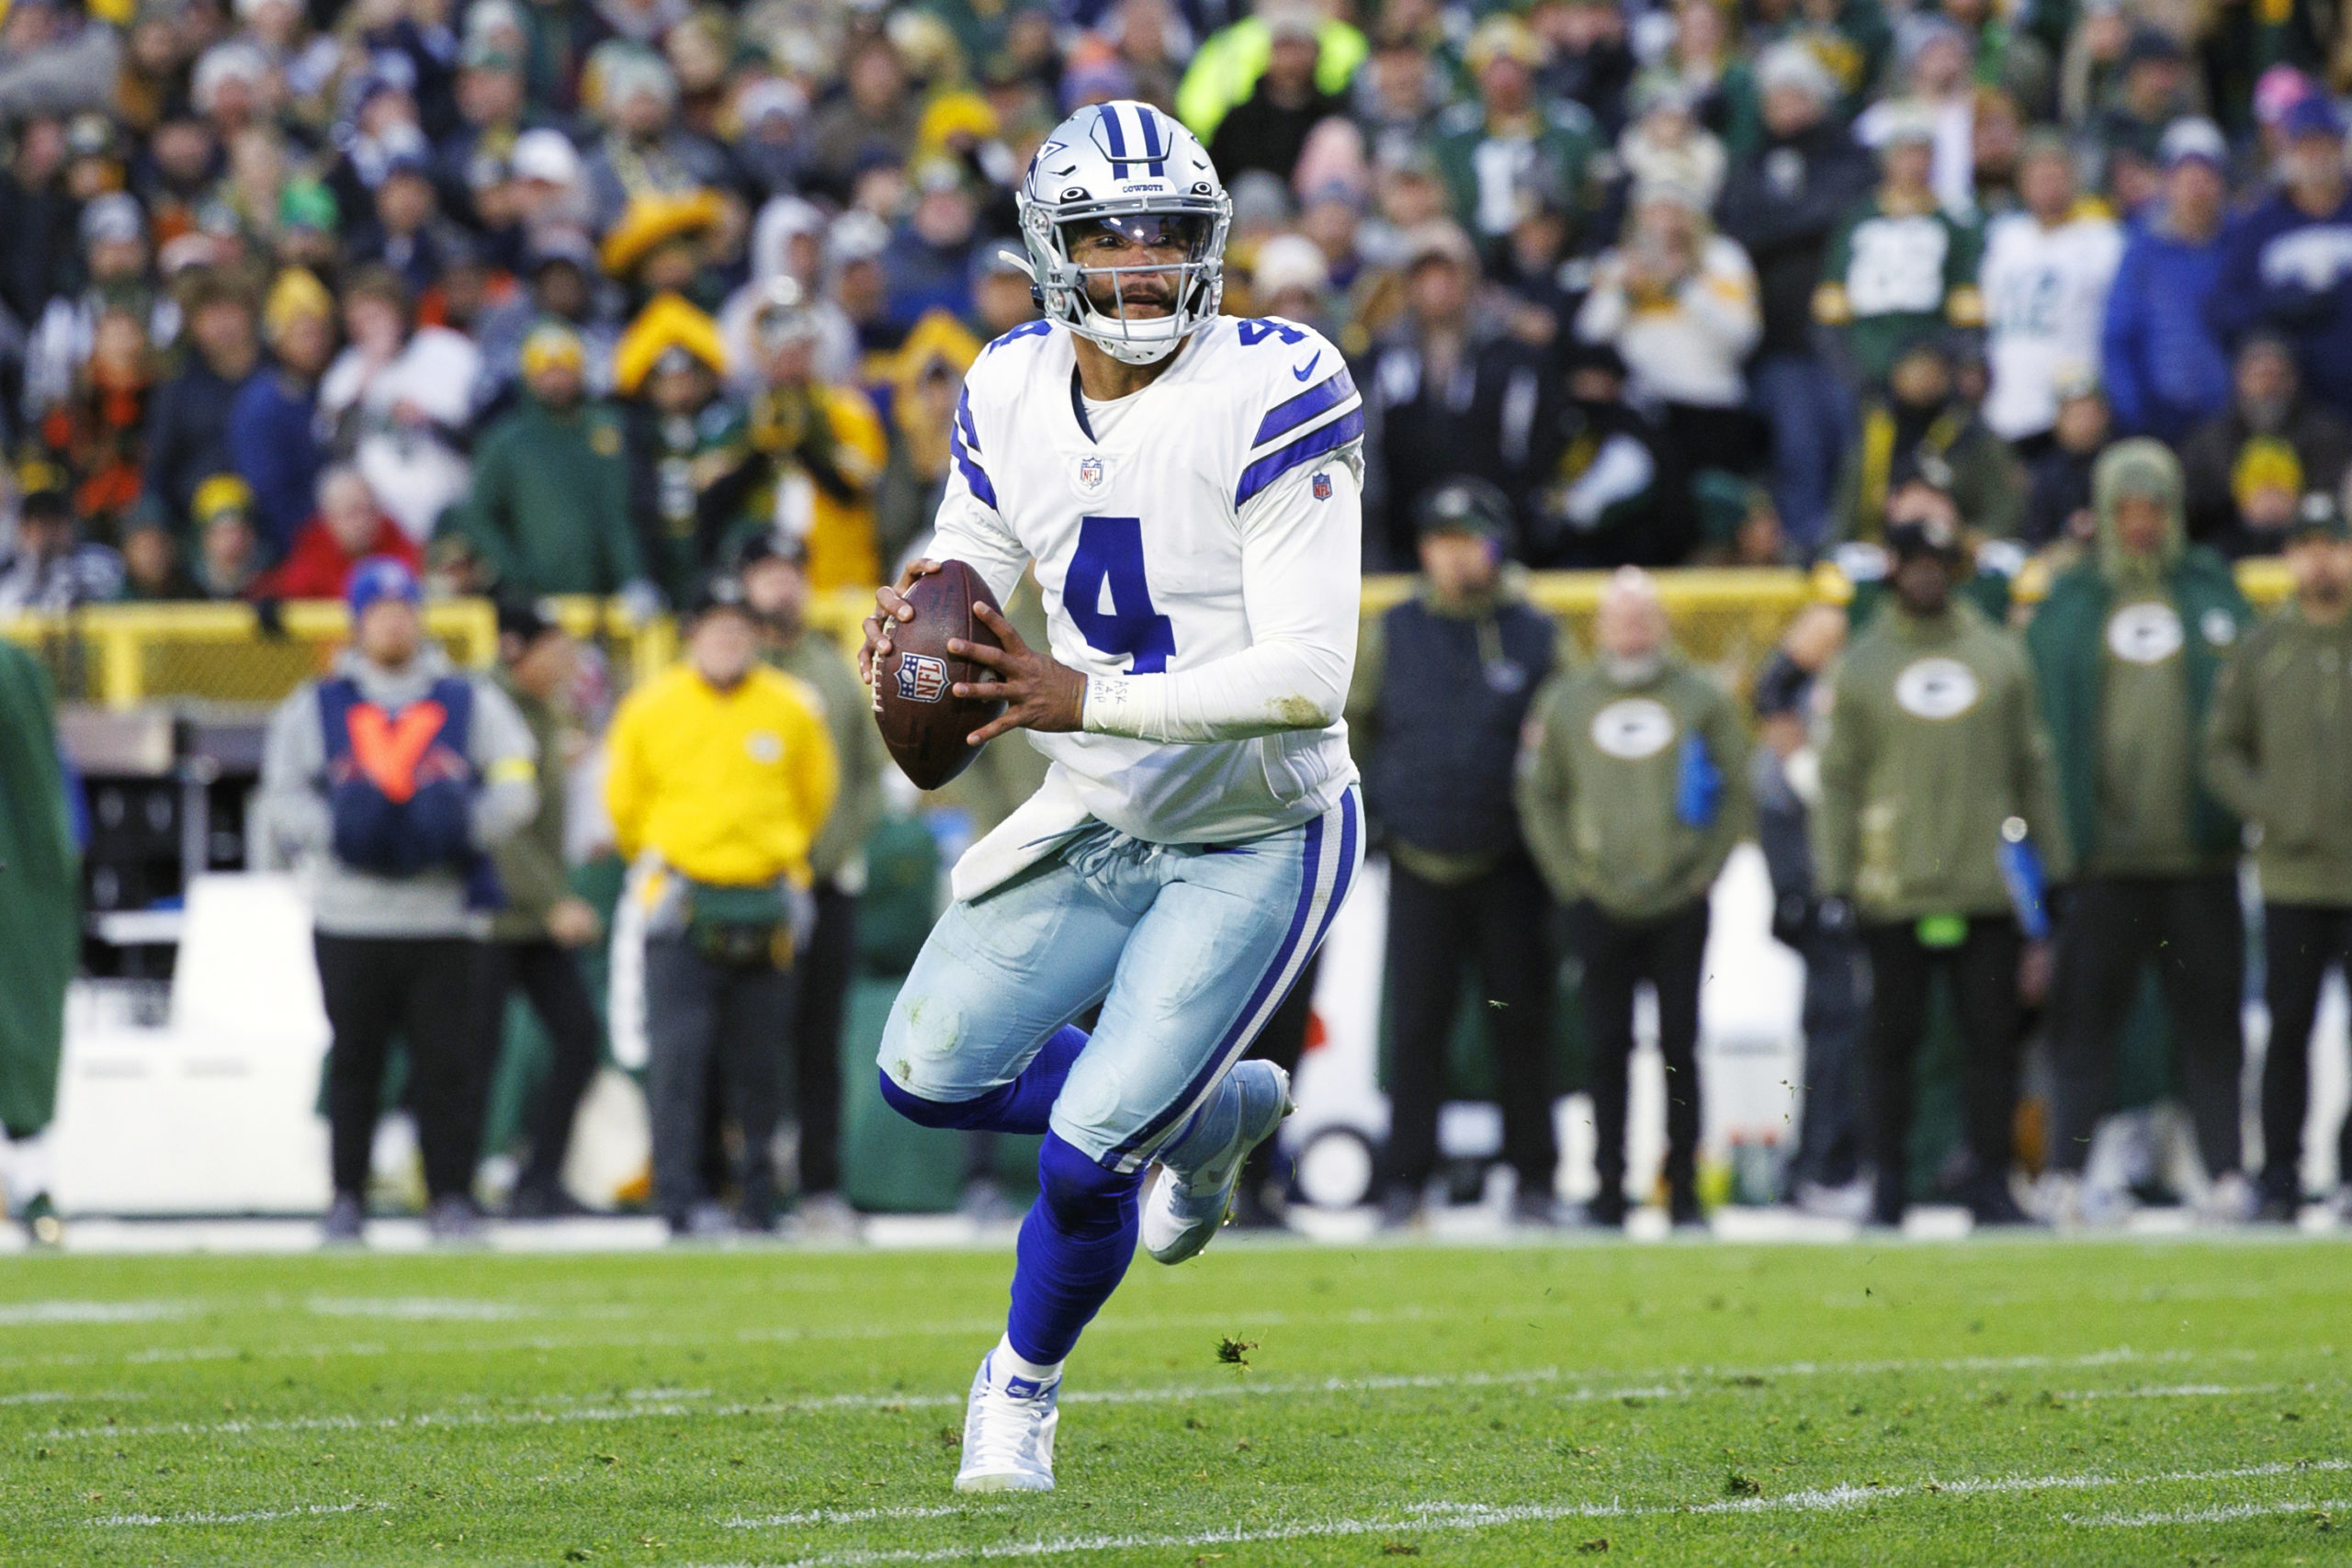 Why Dallas Cowboys Are Close but Not Quite Super Bowl Contenders